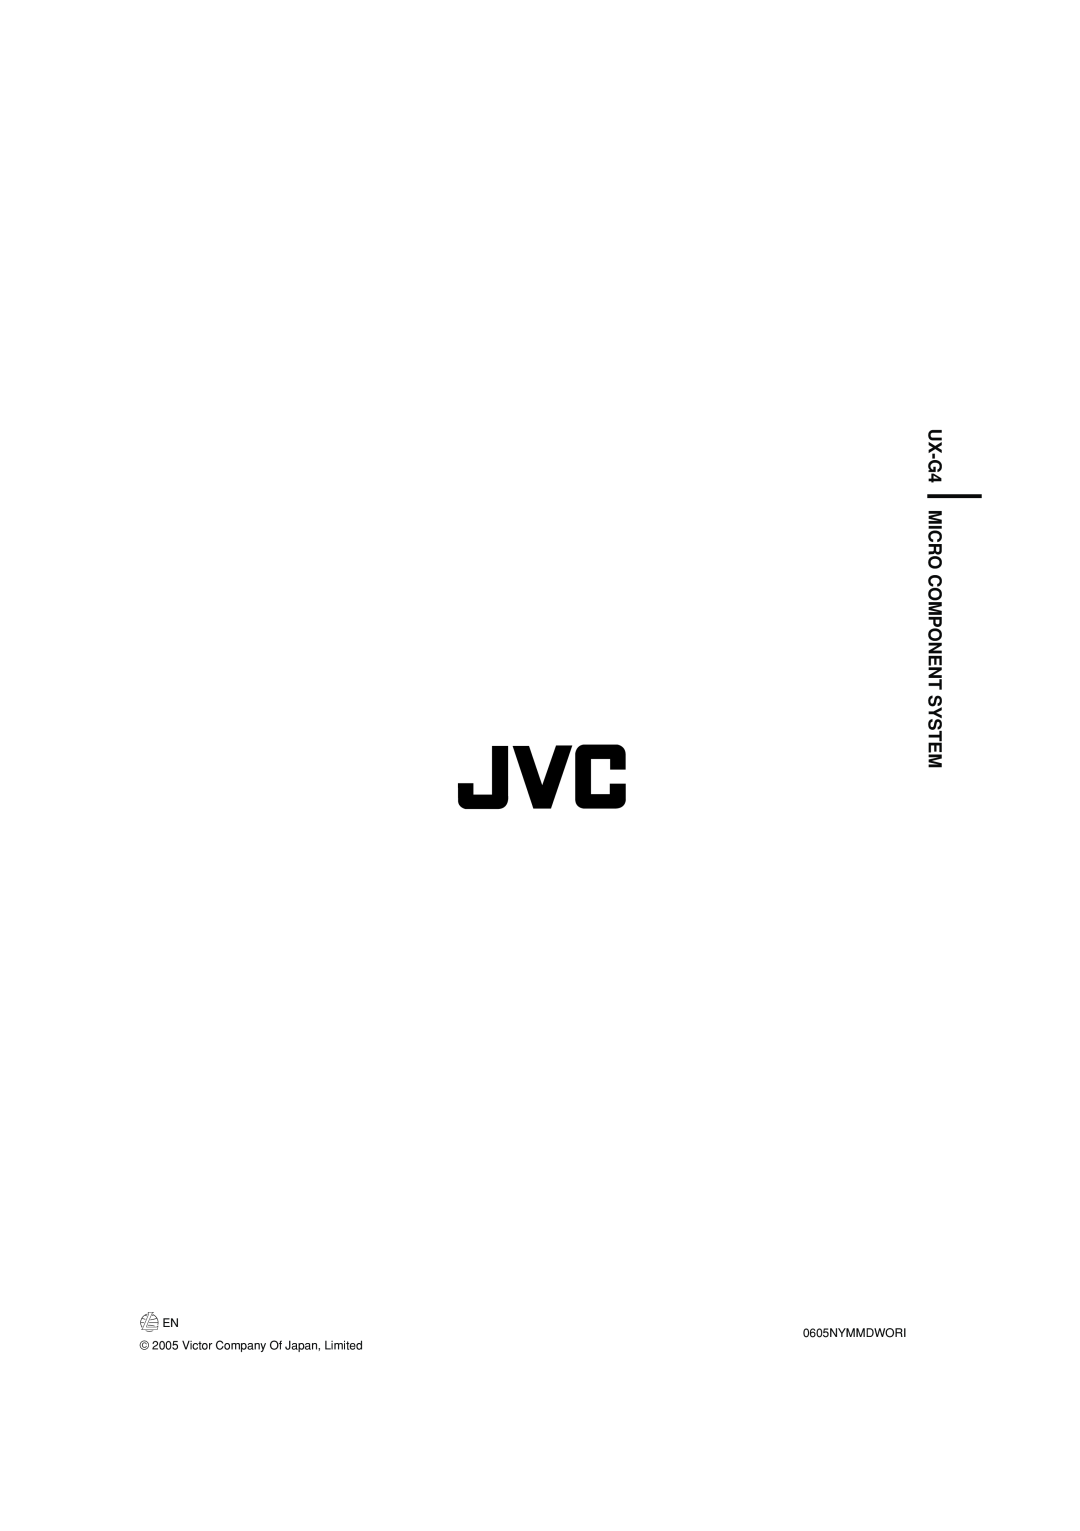 JVC LVT1364-006B manual UX-G4MICRO COMPONENT SYSTEM, 0605NYMMDWORI, Victor Company Of Japan, Limited 